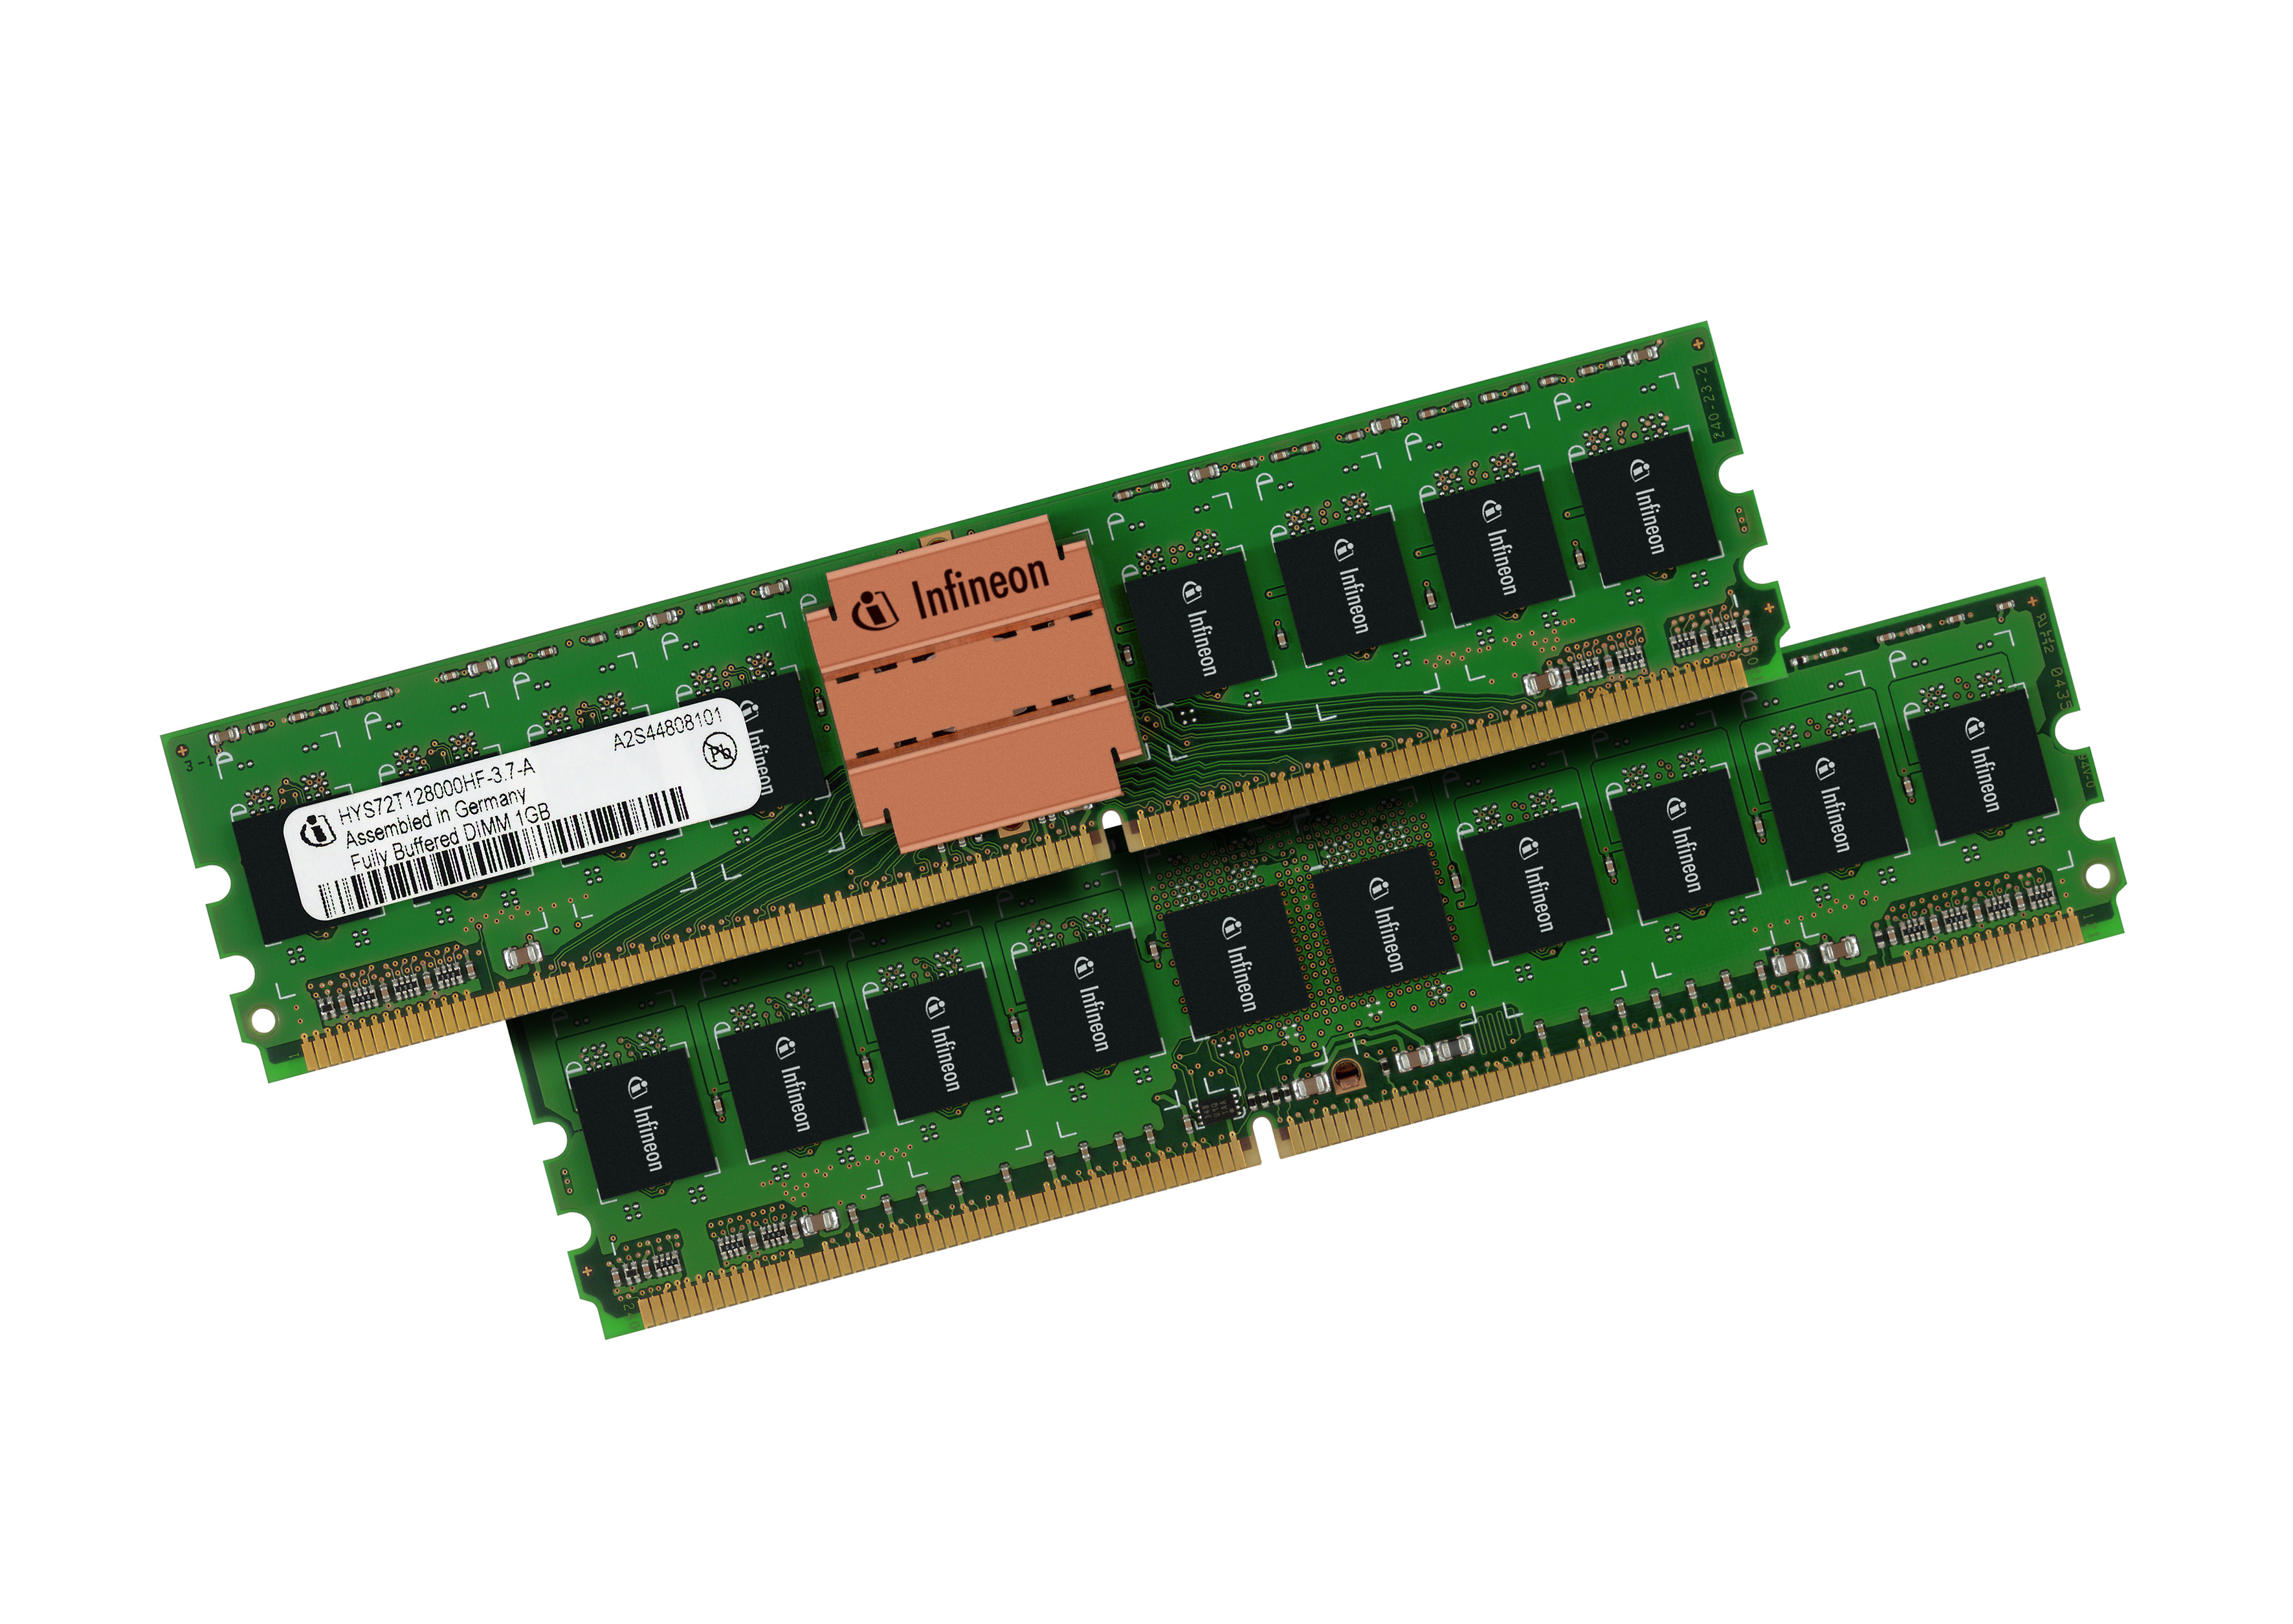 Infineon Boosts DDR2 FB-DIMM Deployment: Designs and Manufactures All